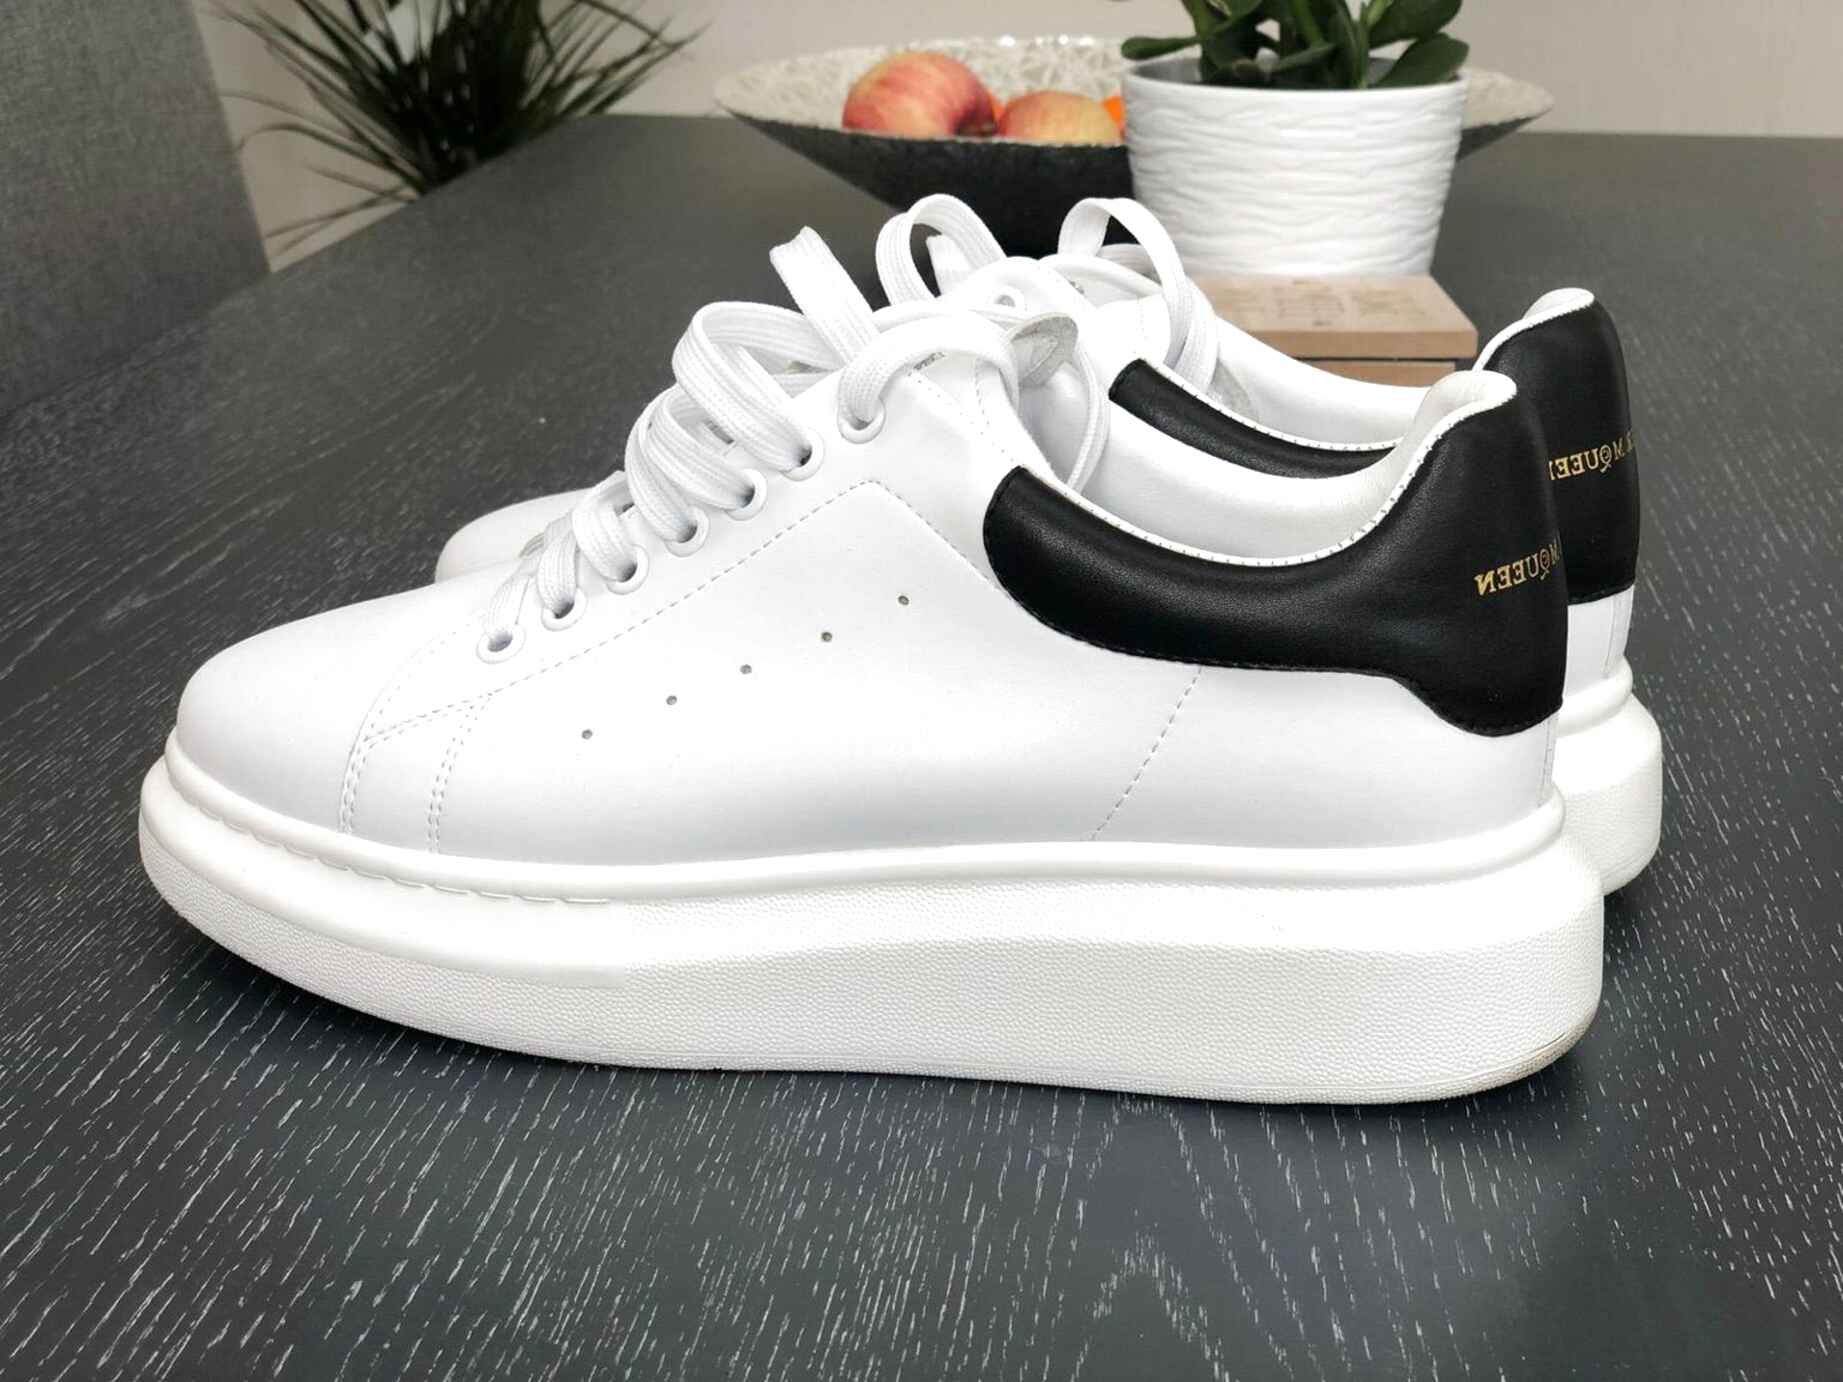 Alexander Mcqueen Trainers for sale in UK | 79 used Alexander Mcqueen Trainers